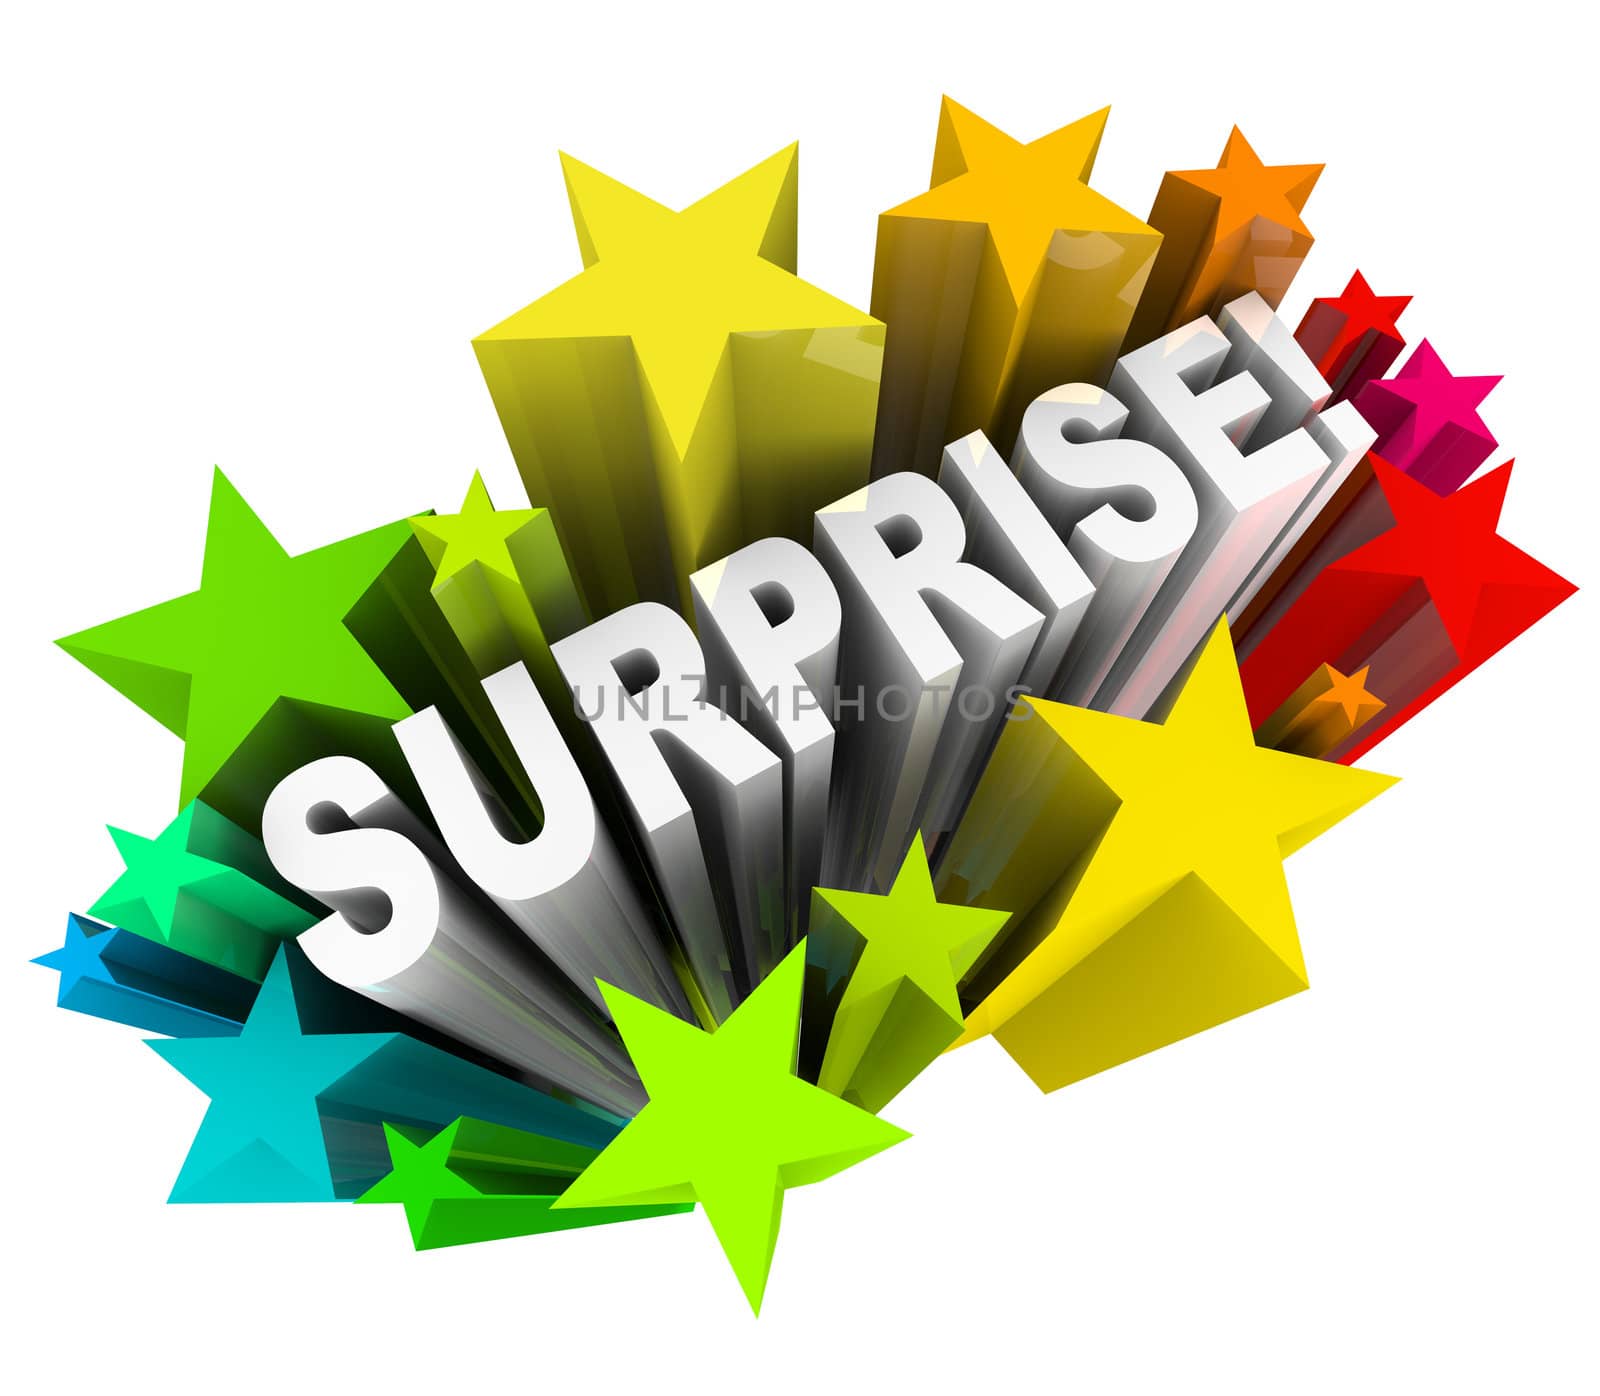 The word Surprise in 3d letters shooting out of a burst of colorful stars or fireworks illustrating the excitement of fun news or information